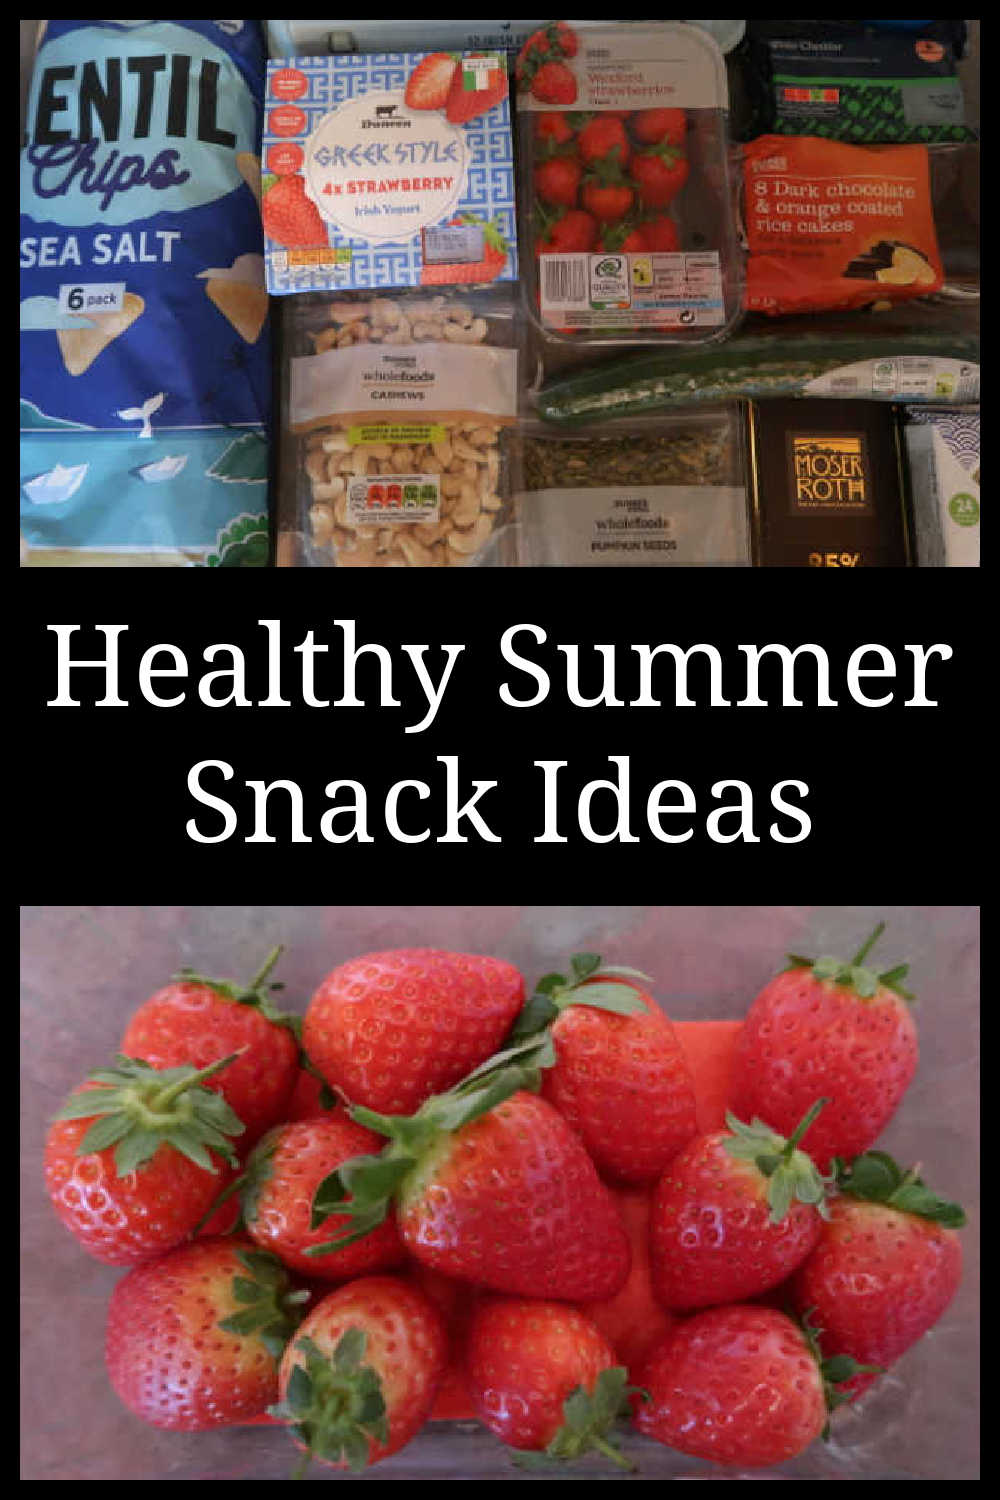 Summer Snacks Ideas - The Best Quick and Easy Healthy Snack Recipes to make and perfect grab and go options.